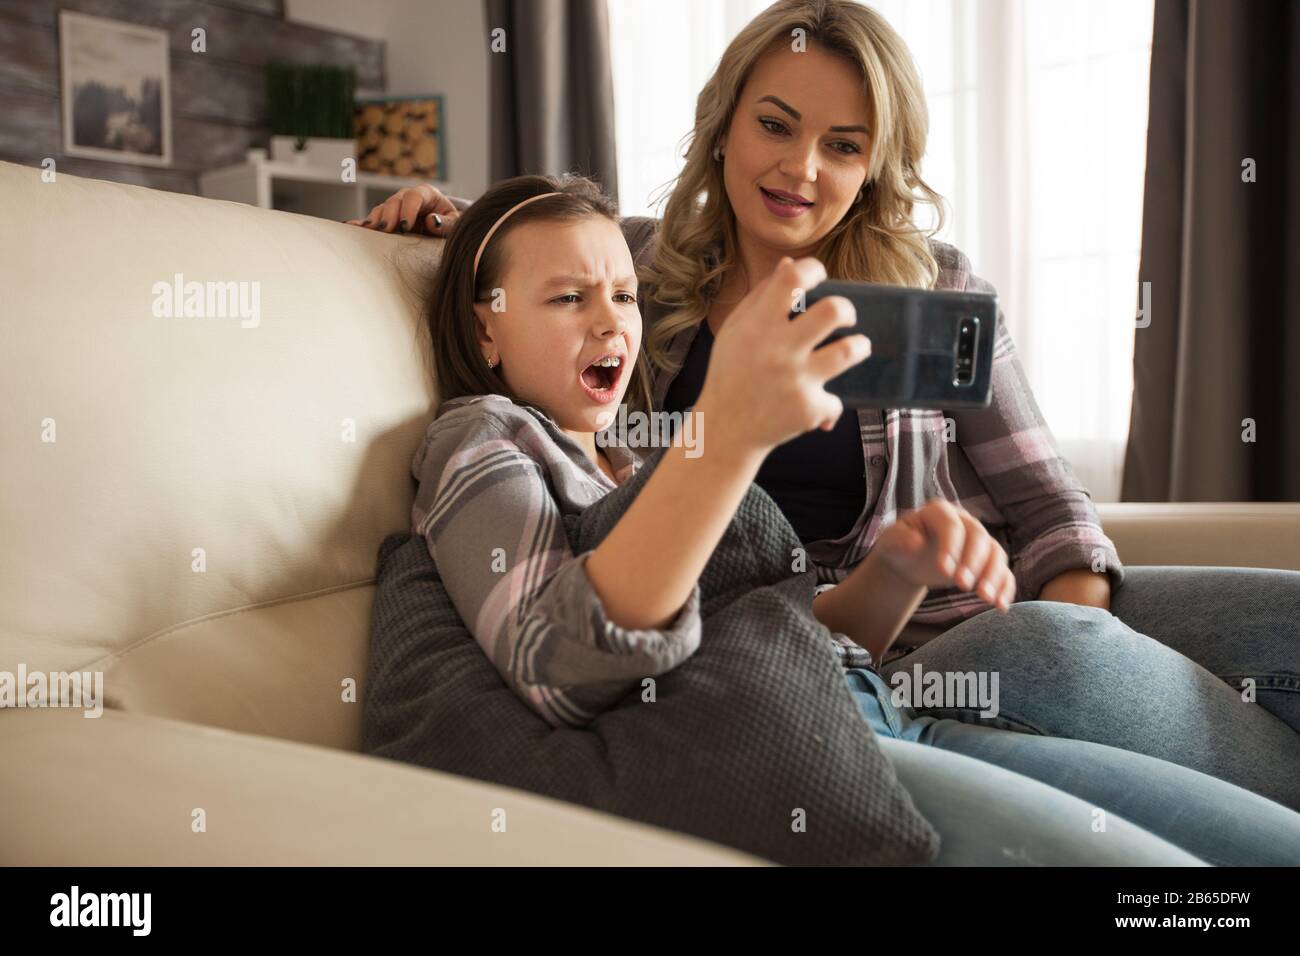 Cute little girl shocked after watching a disturbing online video on mobile phone next to her mother. Modern mother. Stock Photo